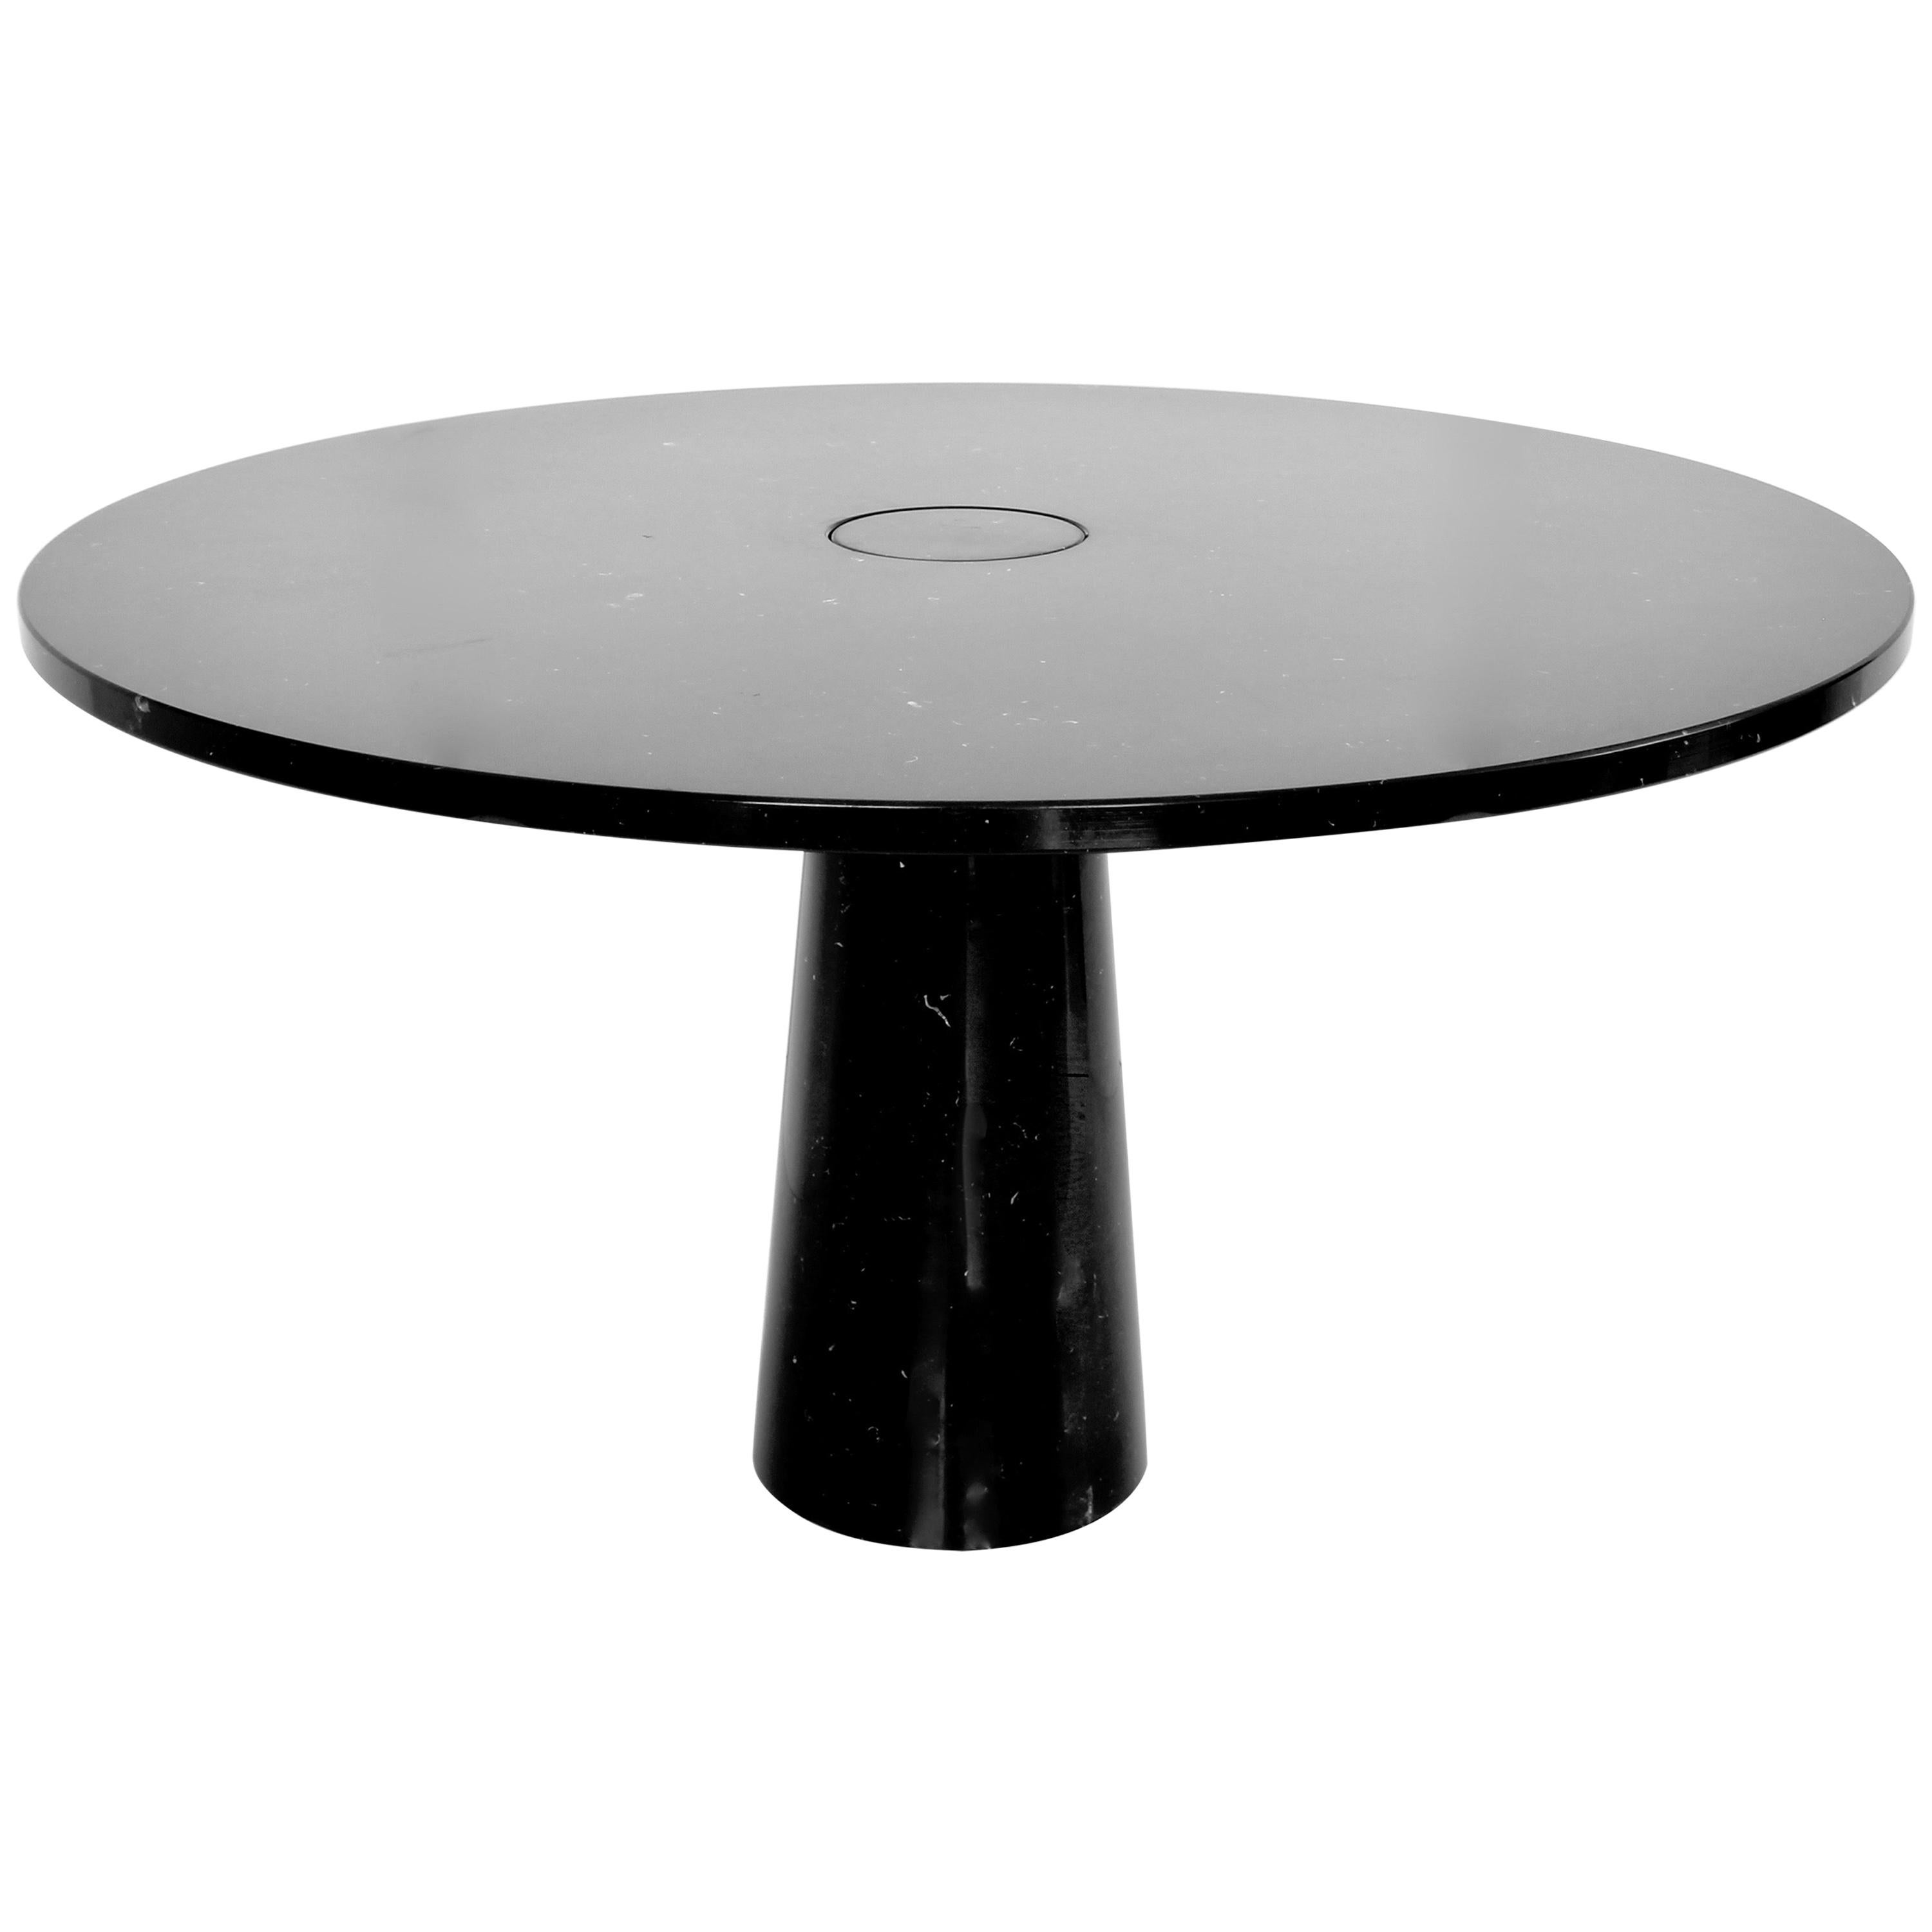 Angelo Mangiarotti Eros Round Dining Table in Black Marquina Marble for Skipper